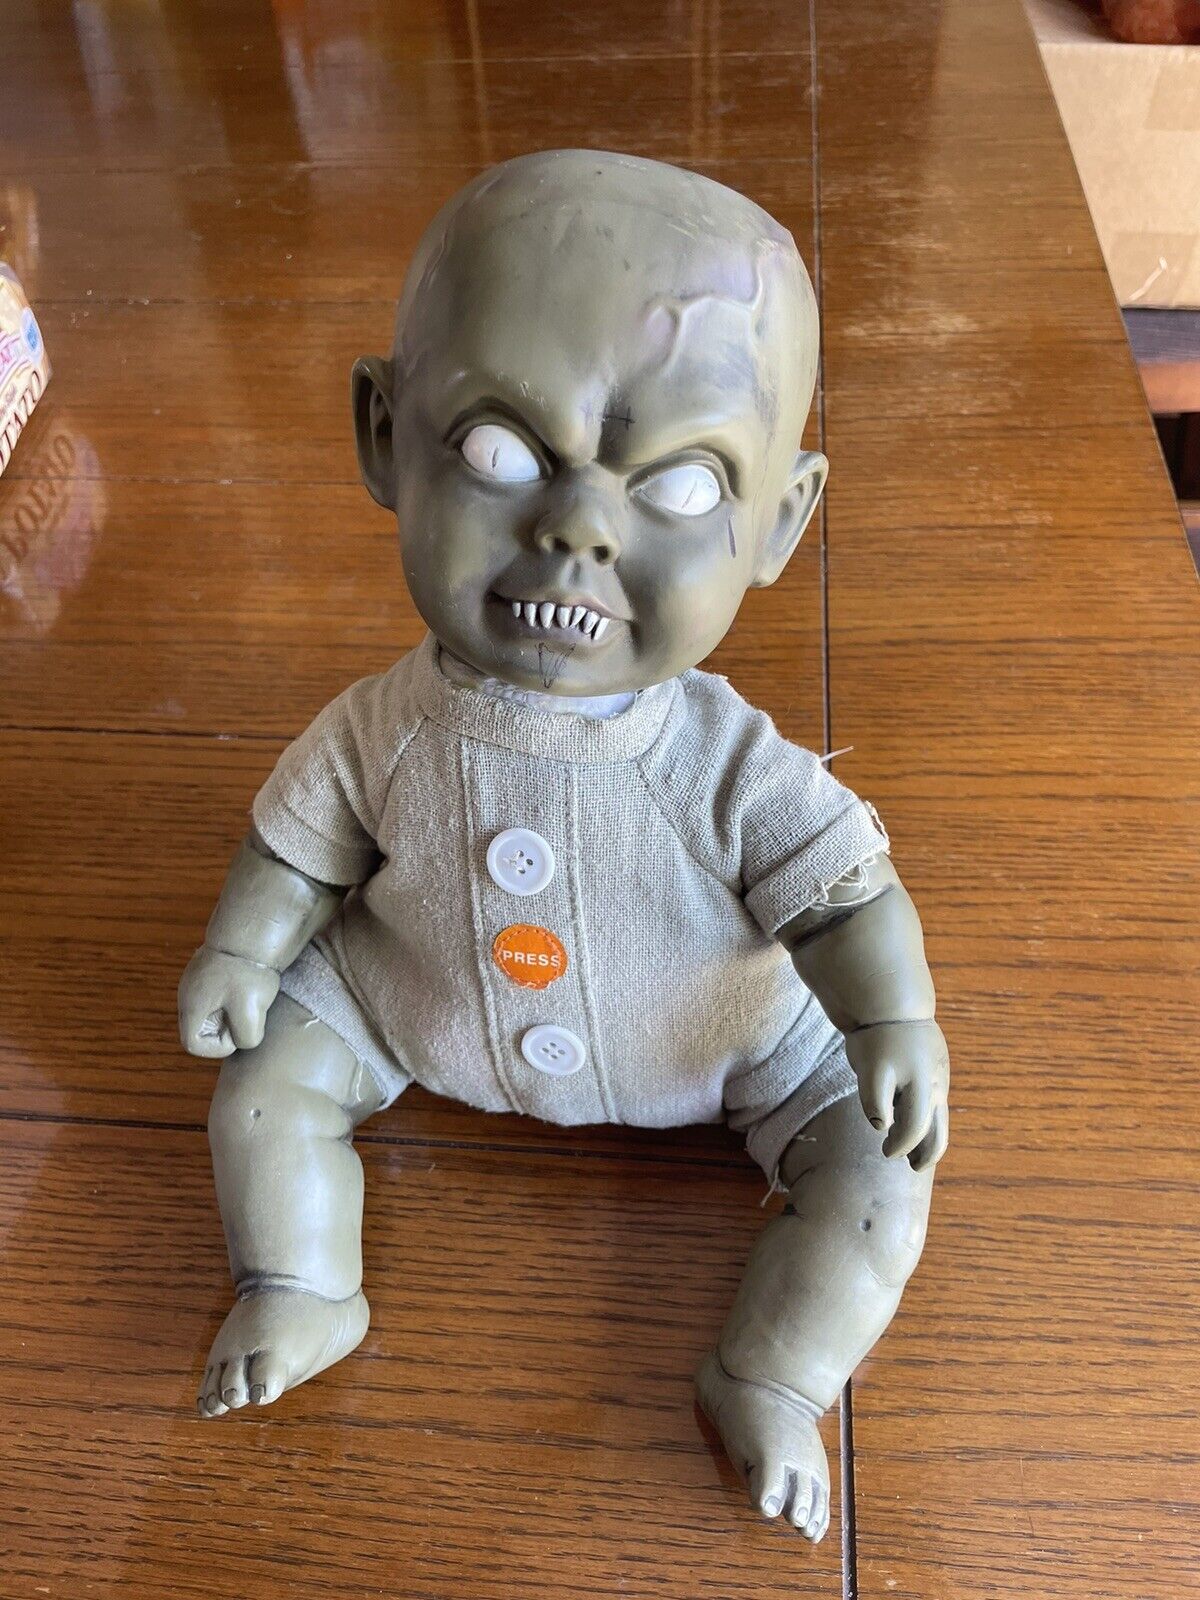 Spirit Halloween The Wiggler Zombie Baby Doll Does Not Work